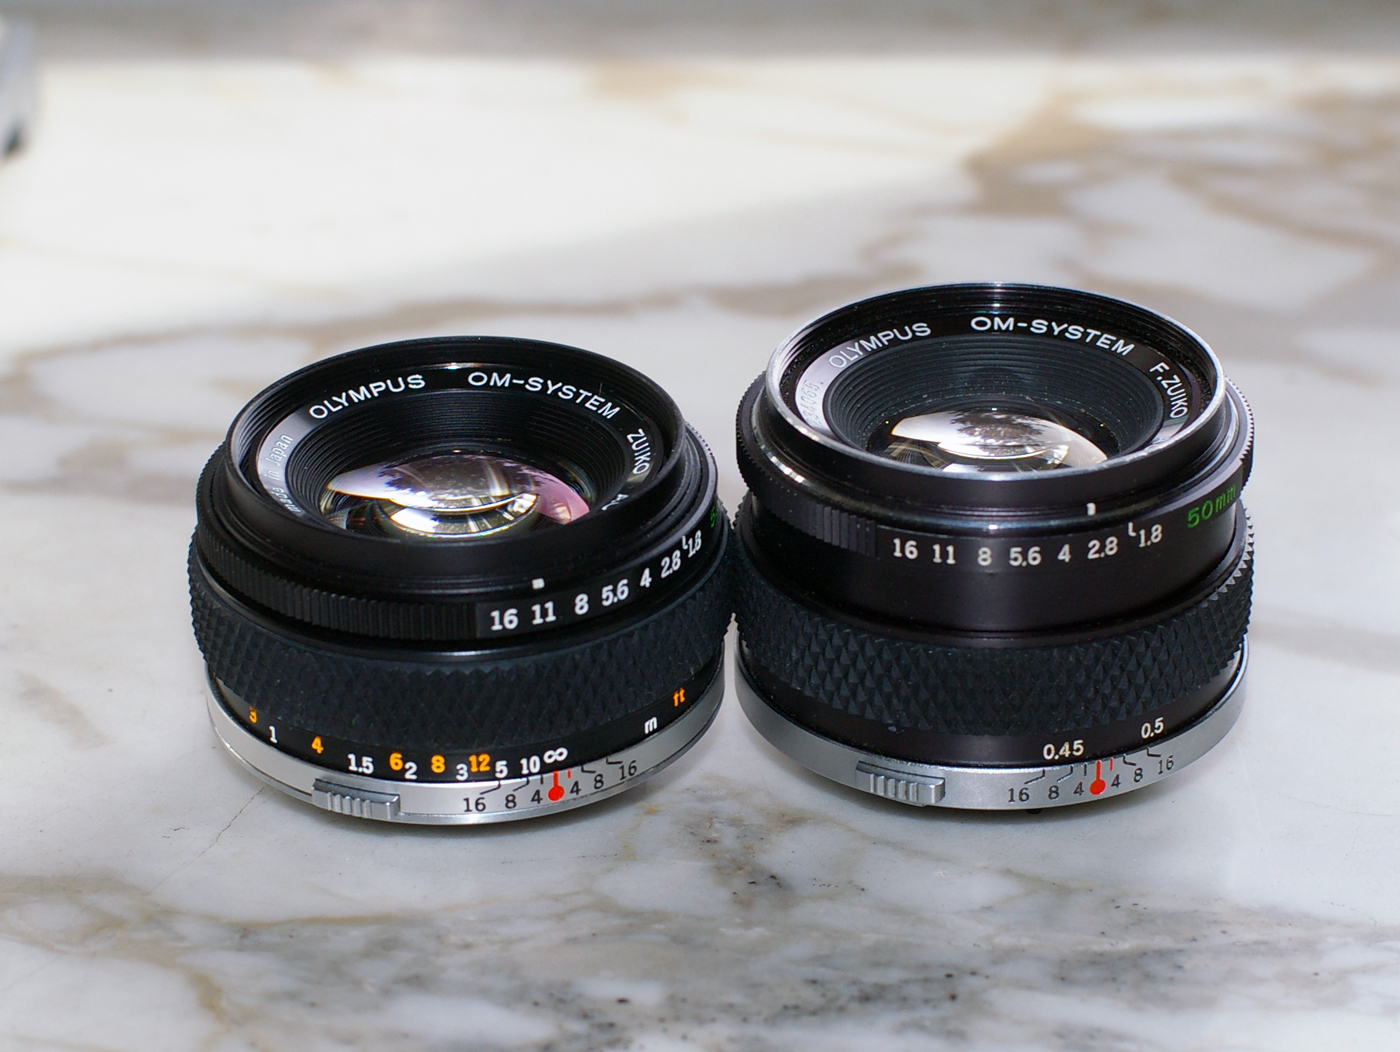 Earliest and latest versions of Zuiko 1.8/50mm